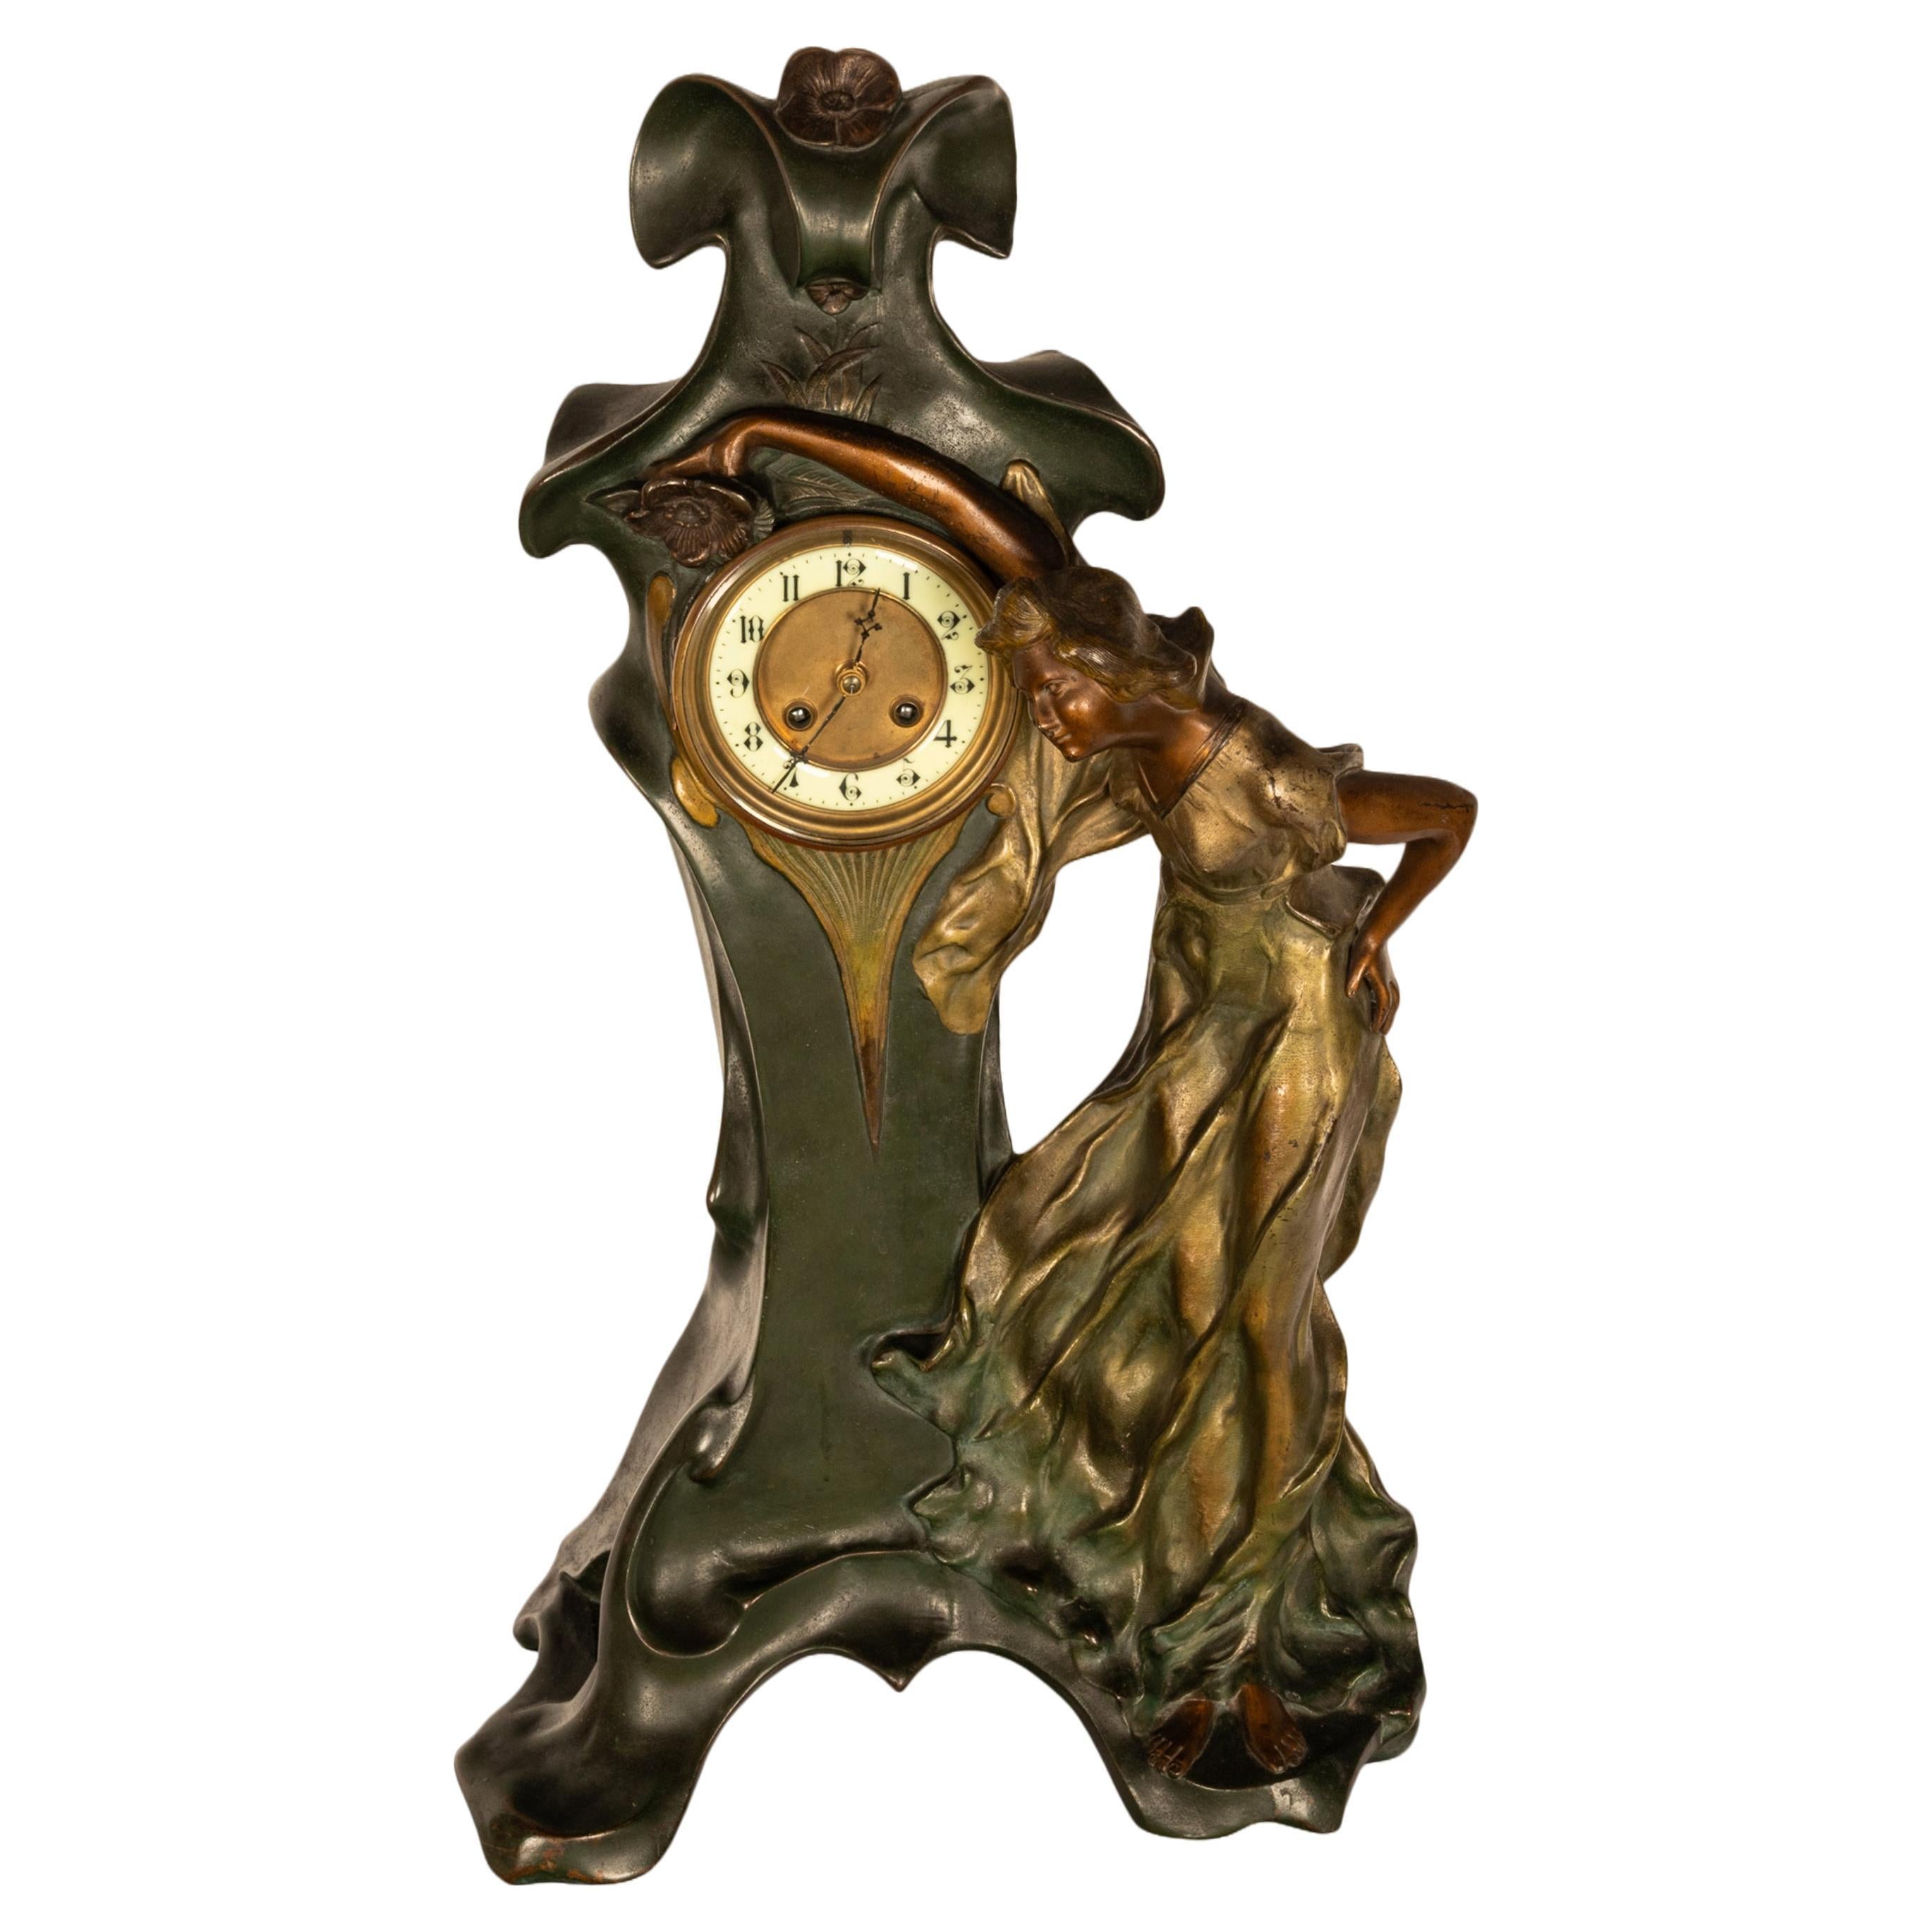 Antique French Art Nouveau Cold-Painted Bronze Figural Statue 8 Day Clock 1900 In Good Condition For Sale In Portland, OR